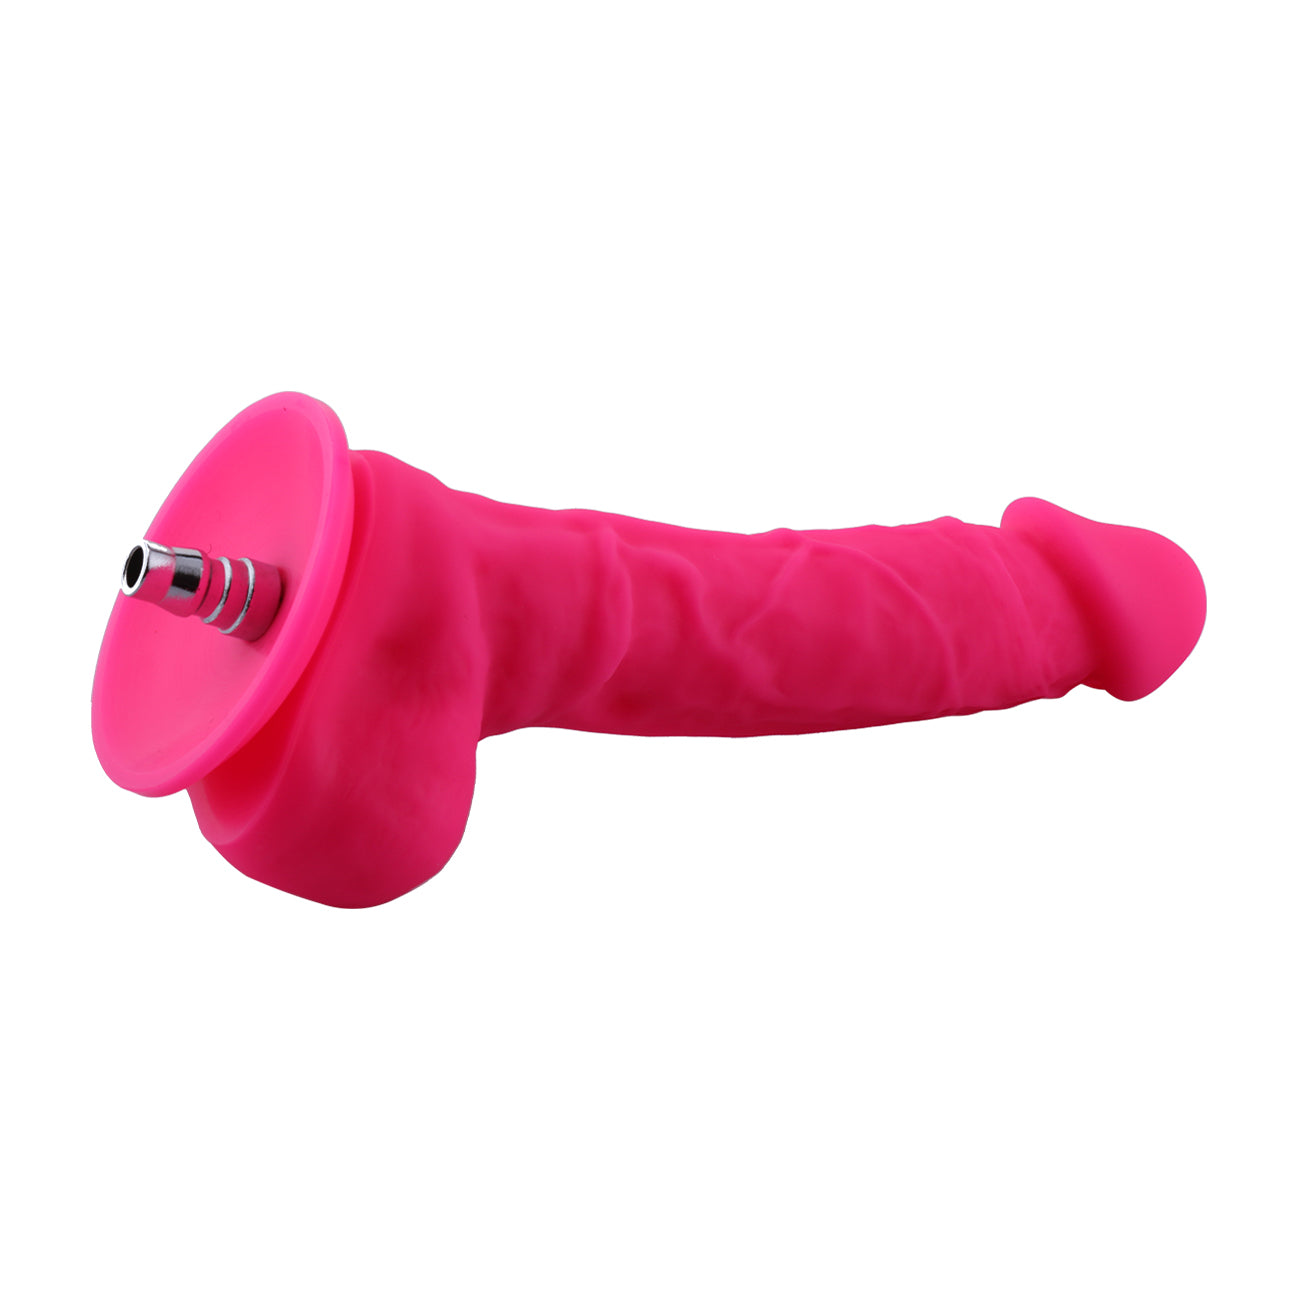 Hismith Premium - 23cm Long Silicone Dildo with Quick Air Connector - Pink